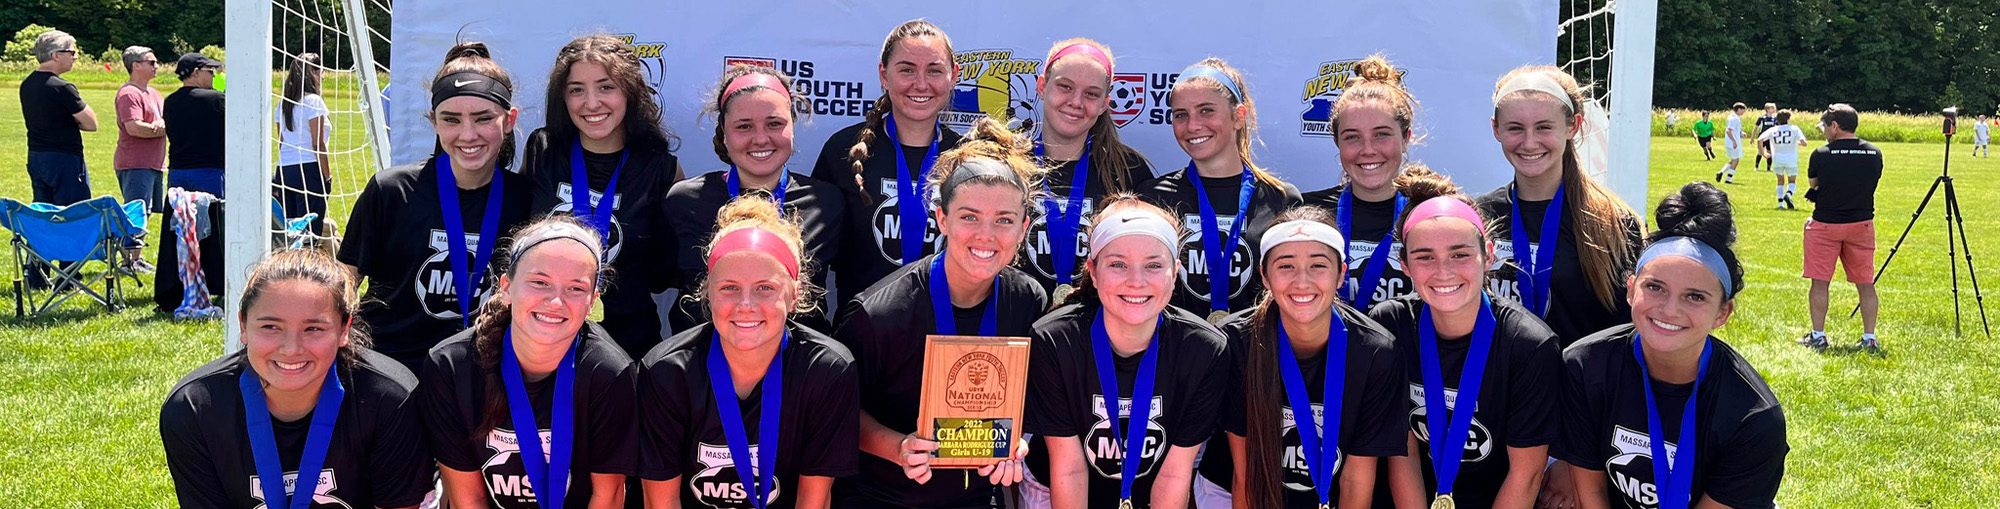 Four LIJSL Clubs Qualify For USYS Eastern Regionals After ENY State Cup